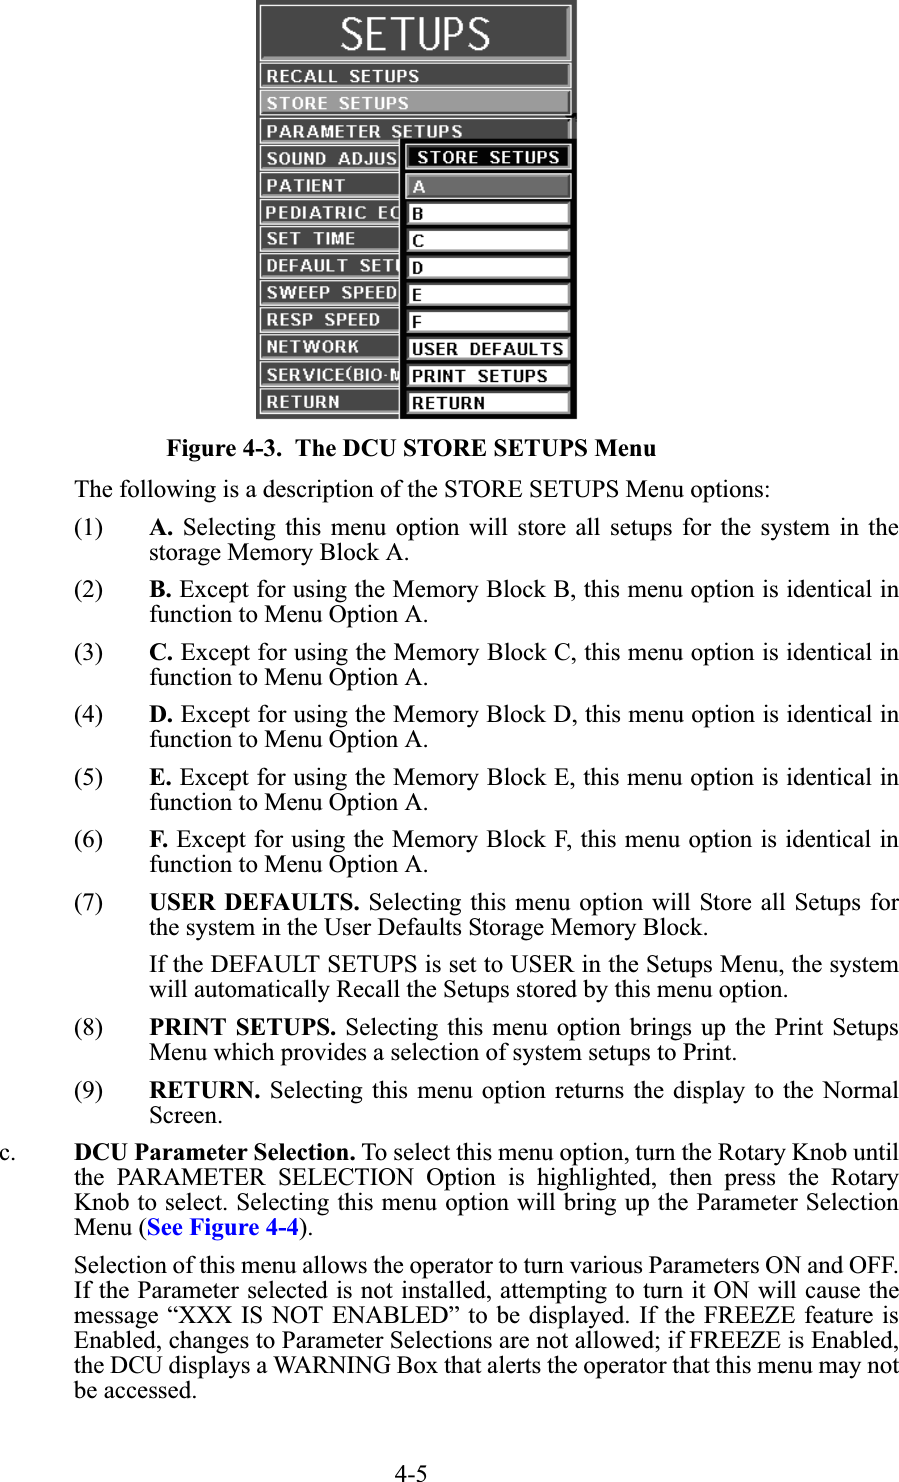 4-5Figure 4-3.  The DCU STORE SETUPS MenuThe following is a description of the STORE SETUPS Menu options:(1) A. Selecting this menu option will store all setups for the system in thestorage Memory Block A.(2) B. Except for using the Memory Block B, this menu option is identical infunction to Menu Option A.(3) C. Except for using the Memory Block C, this menu option is identical infunction to Menu Option A.(4) D. Except for using the Memory Block D, this menu option is identical infunction to Menu Option A.(5) E. Except for using the Memory Block E, this menu option is identical infunction to Menu Option A.(6) F. Except for using the Memory Block F, this menu option is identical infunction to Menu Option A.(7) USER DEFAULTS. Selecting this menu option will Store all Setups forthe system in the User Defaults Storage Memory Block.If the DEFAULT SETUPS is set to USER in the Setups Menu, the systemwill automatically Recall the Setups stored by this menu option.(8) PRINT SETUPS. Selecting this menu option brings up the Print SetupsMenu which provides a selection of system setups to Print.(9) RETURN. Selecting this menu option returns the display to the NormalScreen.c. DCU Parameter Selection. To select this menu option, turn the Rotary Knob untilthe PARAMETER SELECTION Option is highlighted, then press the RotaryKnob to select. Selecting this menu option will bring up the Parameter SelectionMenu (See Figure 4-4).Selection of this menu allows the operator to turn various Parameters ON and OFF.If the Parameter selected is not installed, attempting to turn it ON will cause themessage “XXX IS NOT ENABLED” to be displayed. If the FREEZE feature isEnabled, changes to Parameter Selections are not allowed; if FREEZE is Enabled,the DCU displays a WARNING Box that alerts the operator that this menu may notbe accessed.